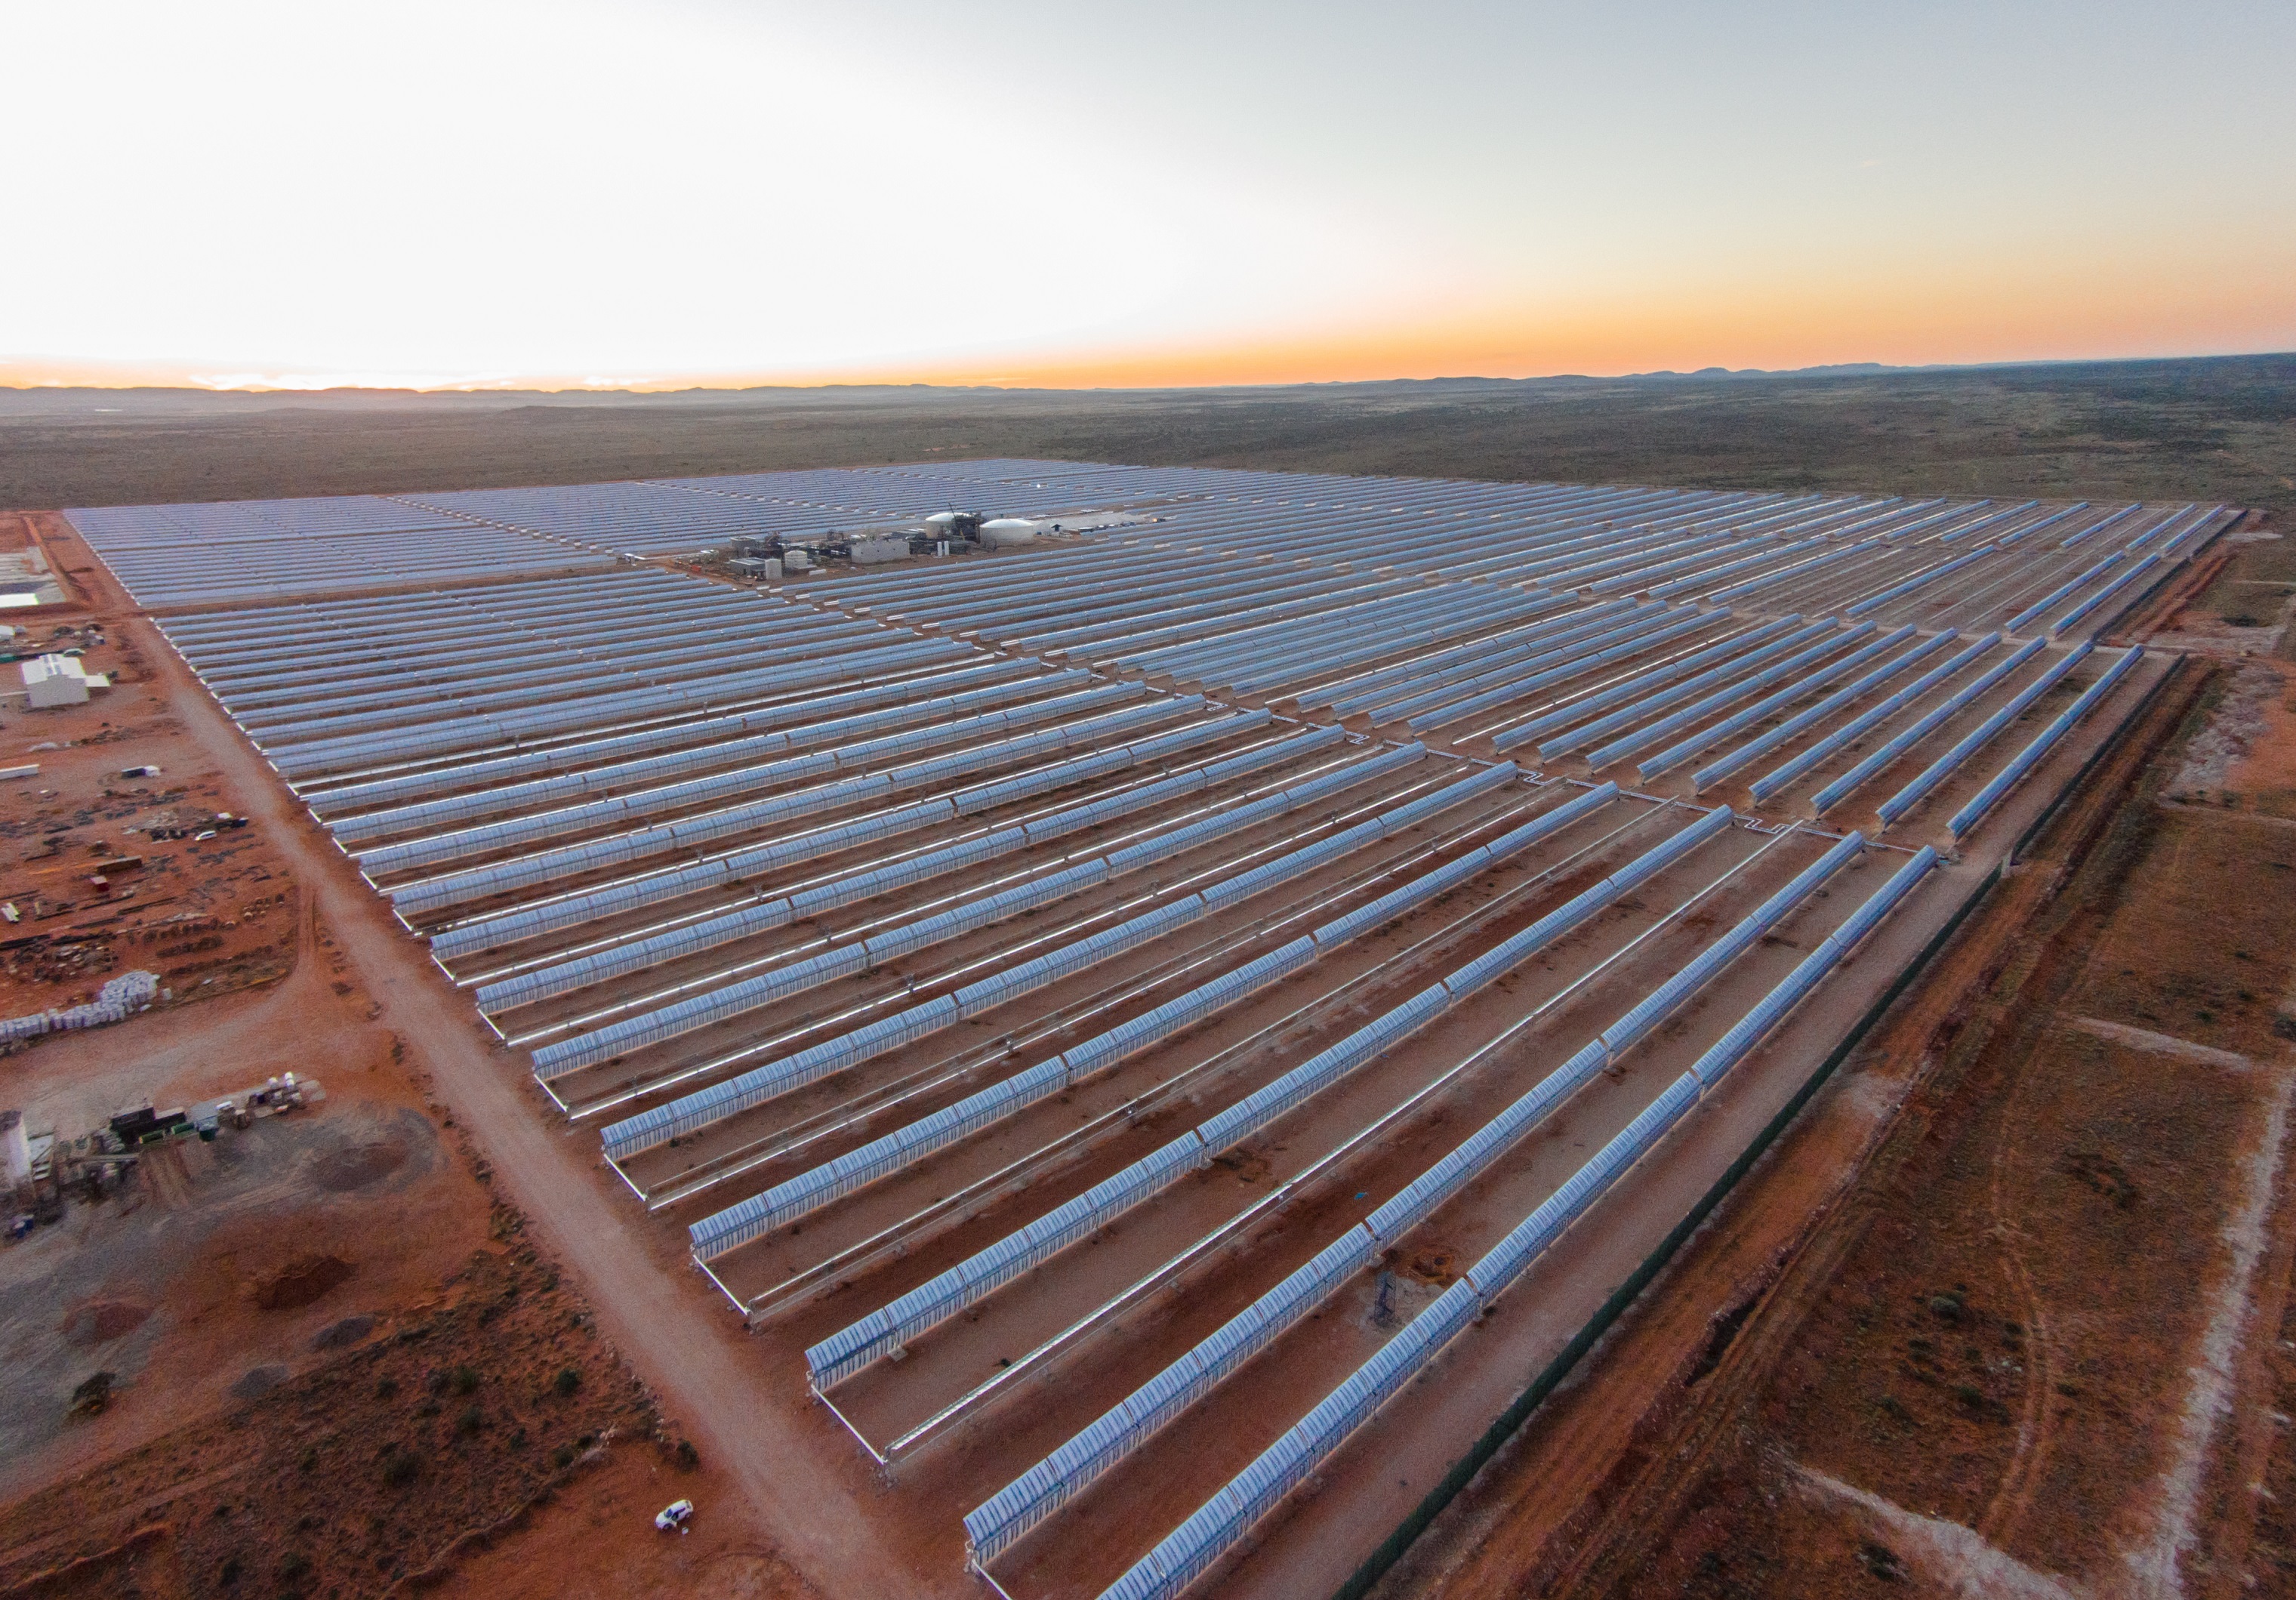 Making solar headway in South Africa with first CSP project